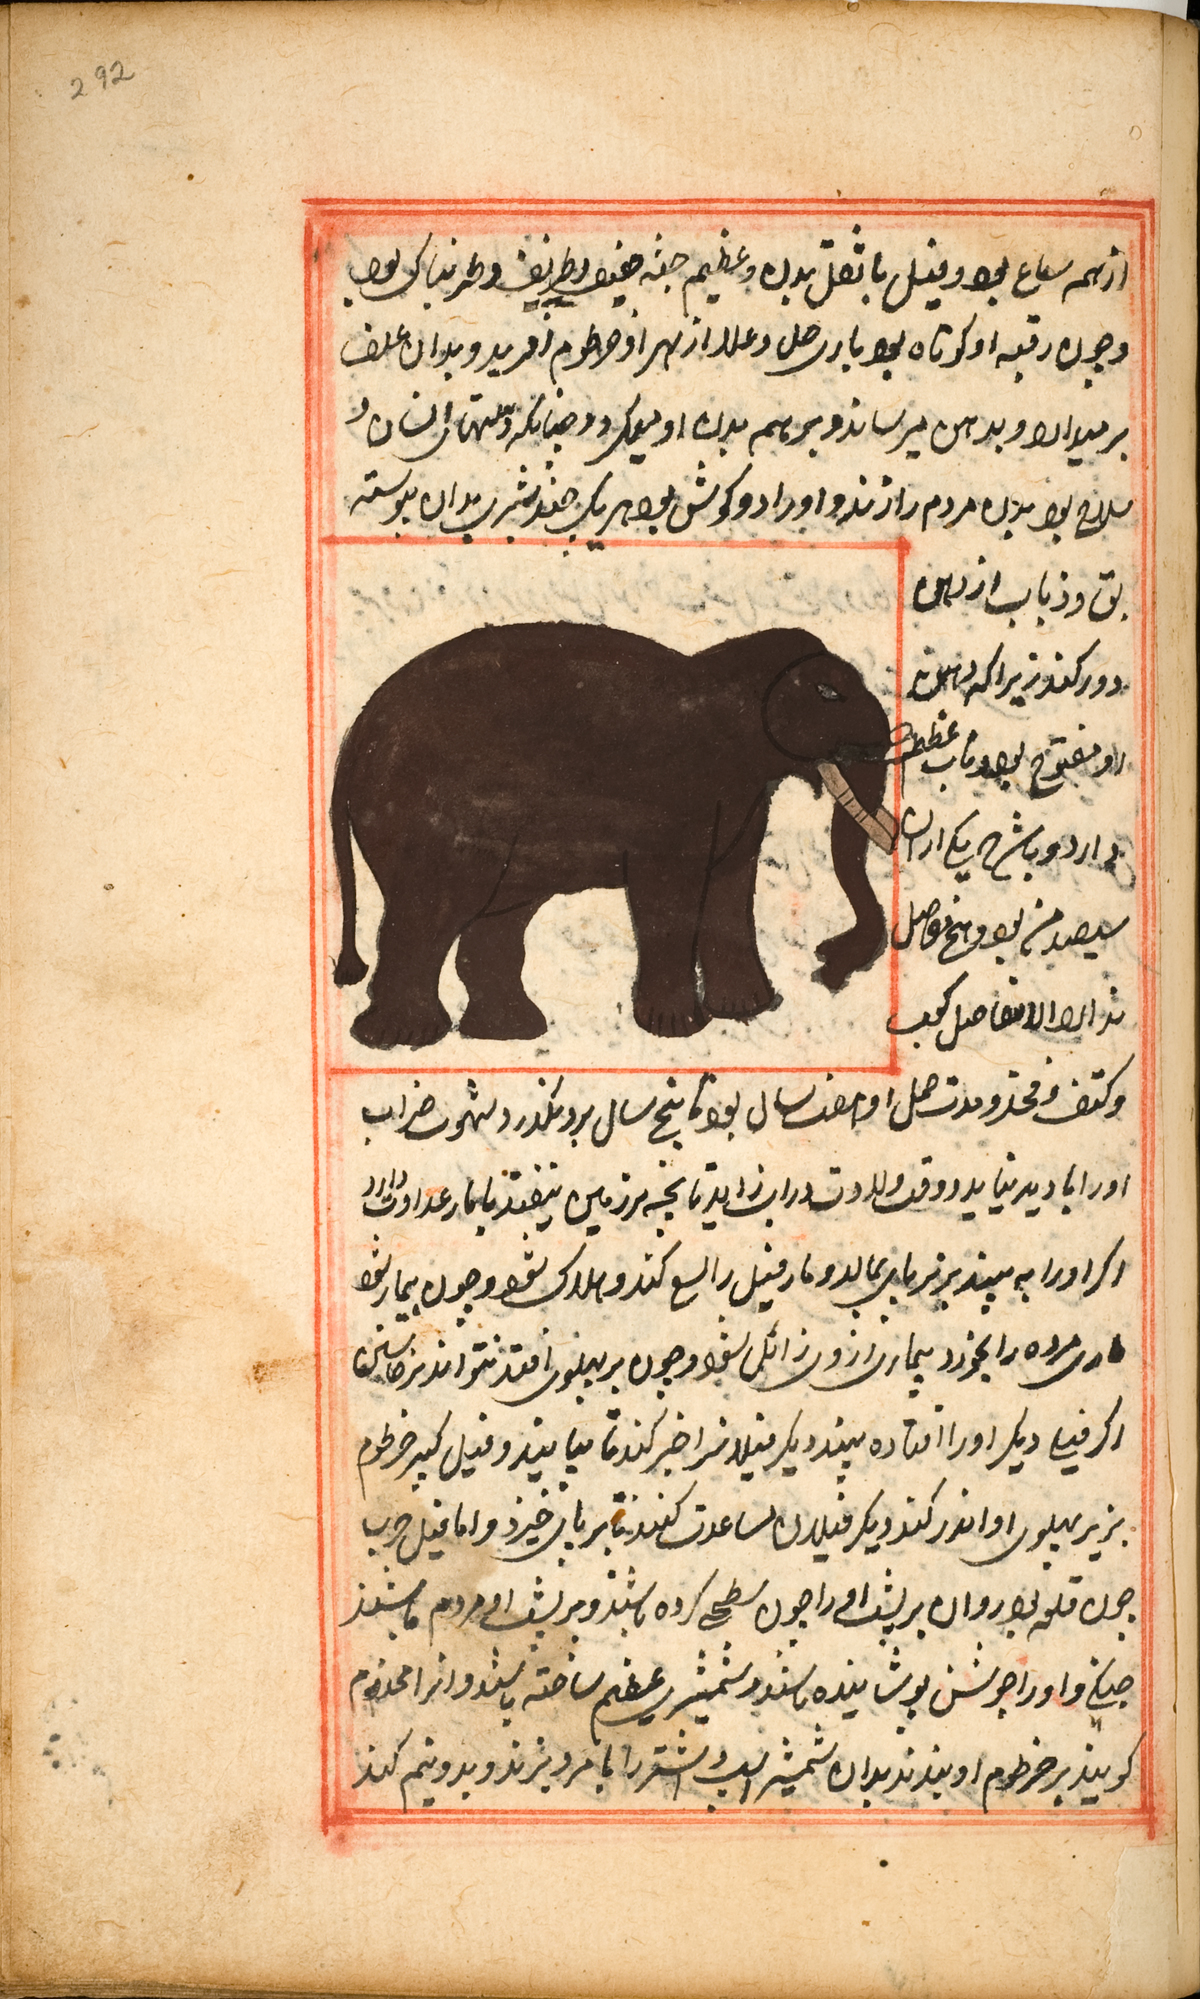 A large brown Asian elephant with very small ears and two large whit tusks, surrounded by Persian text and a red double ruled border.